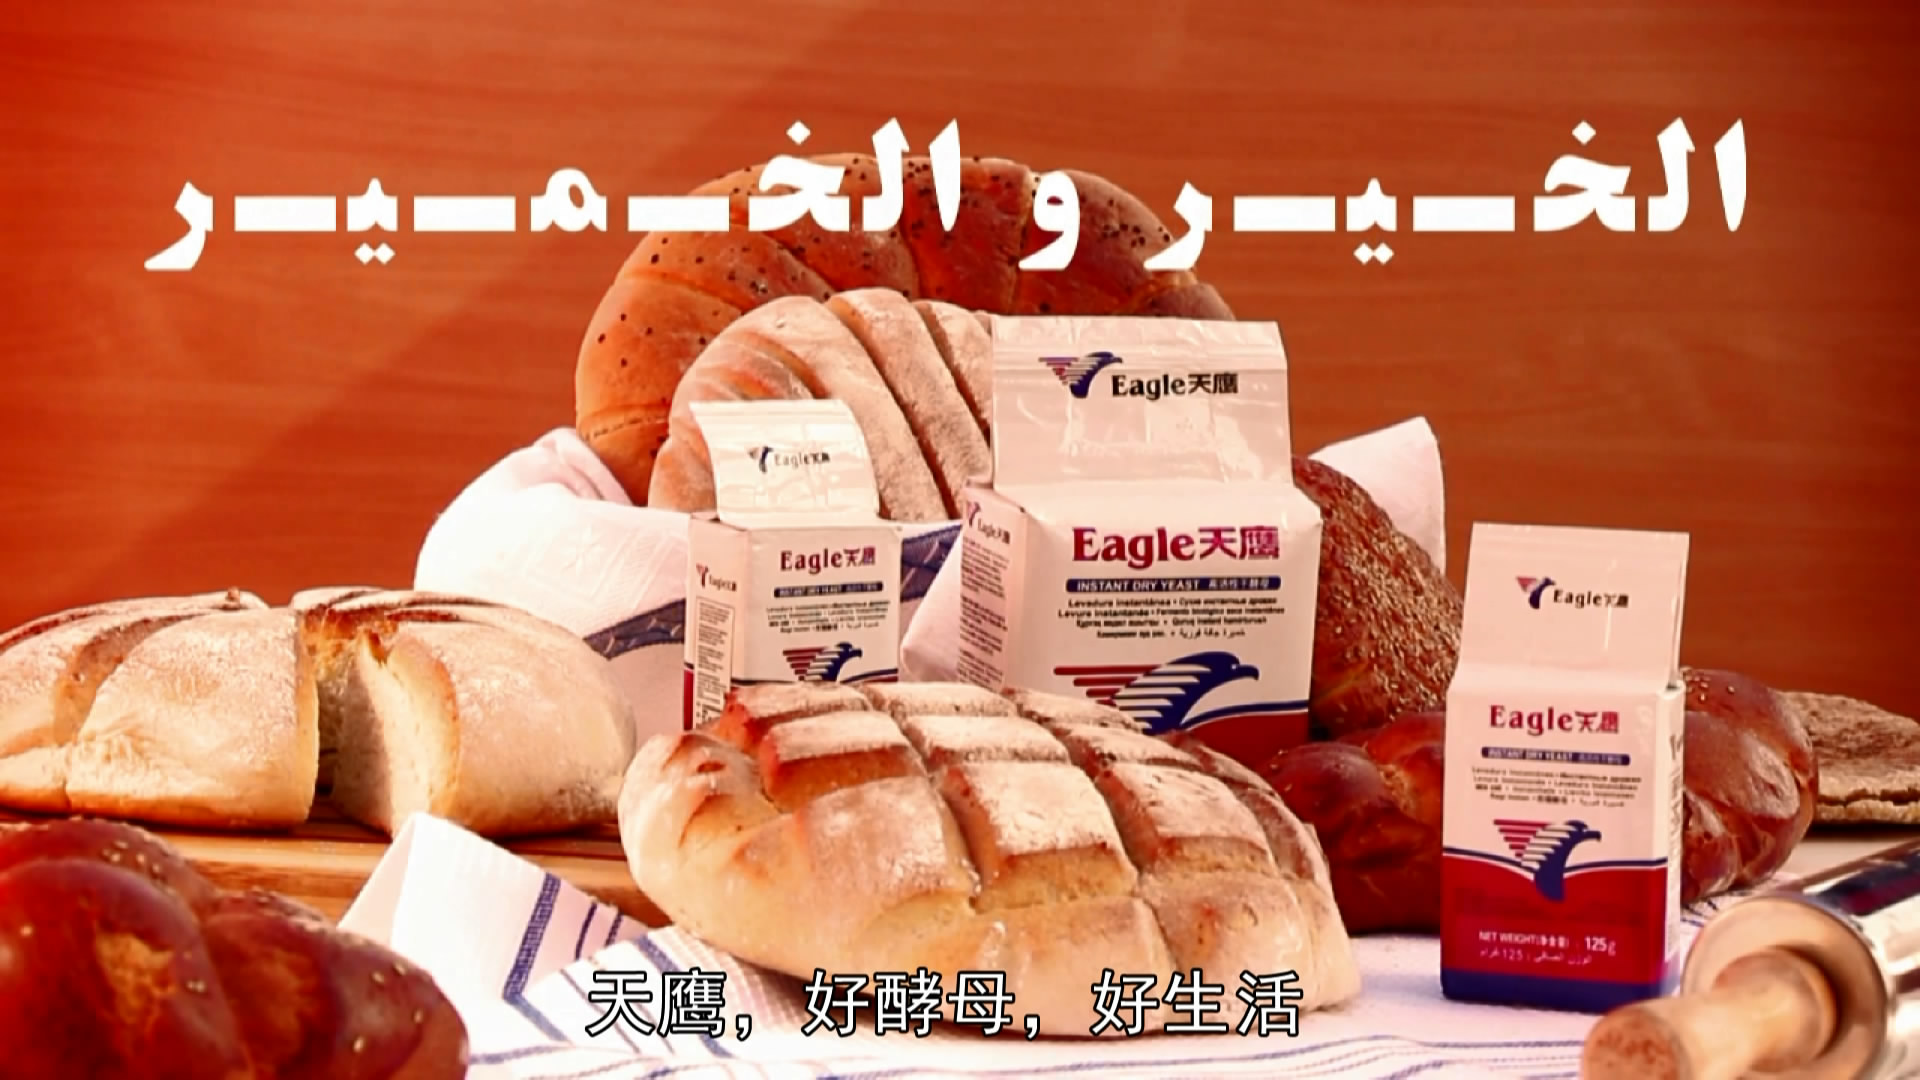 Eagle yeast AD in Afica